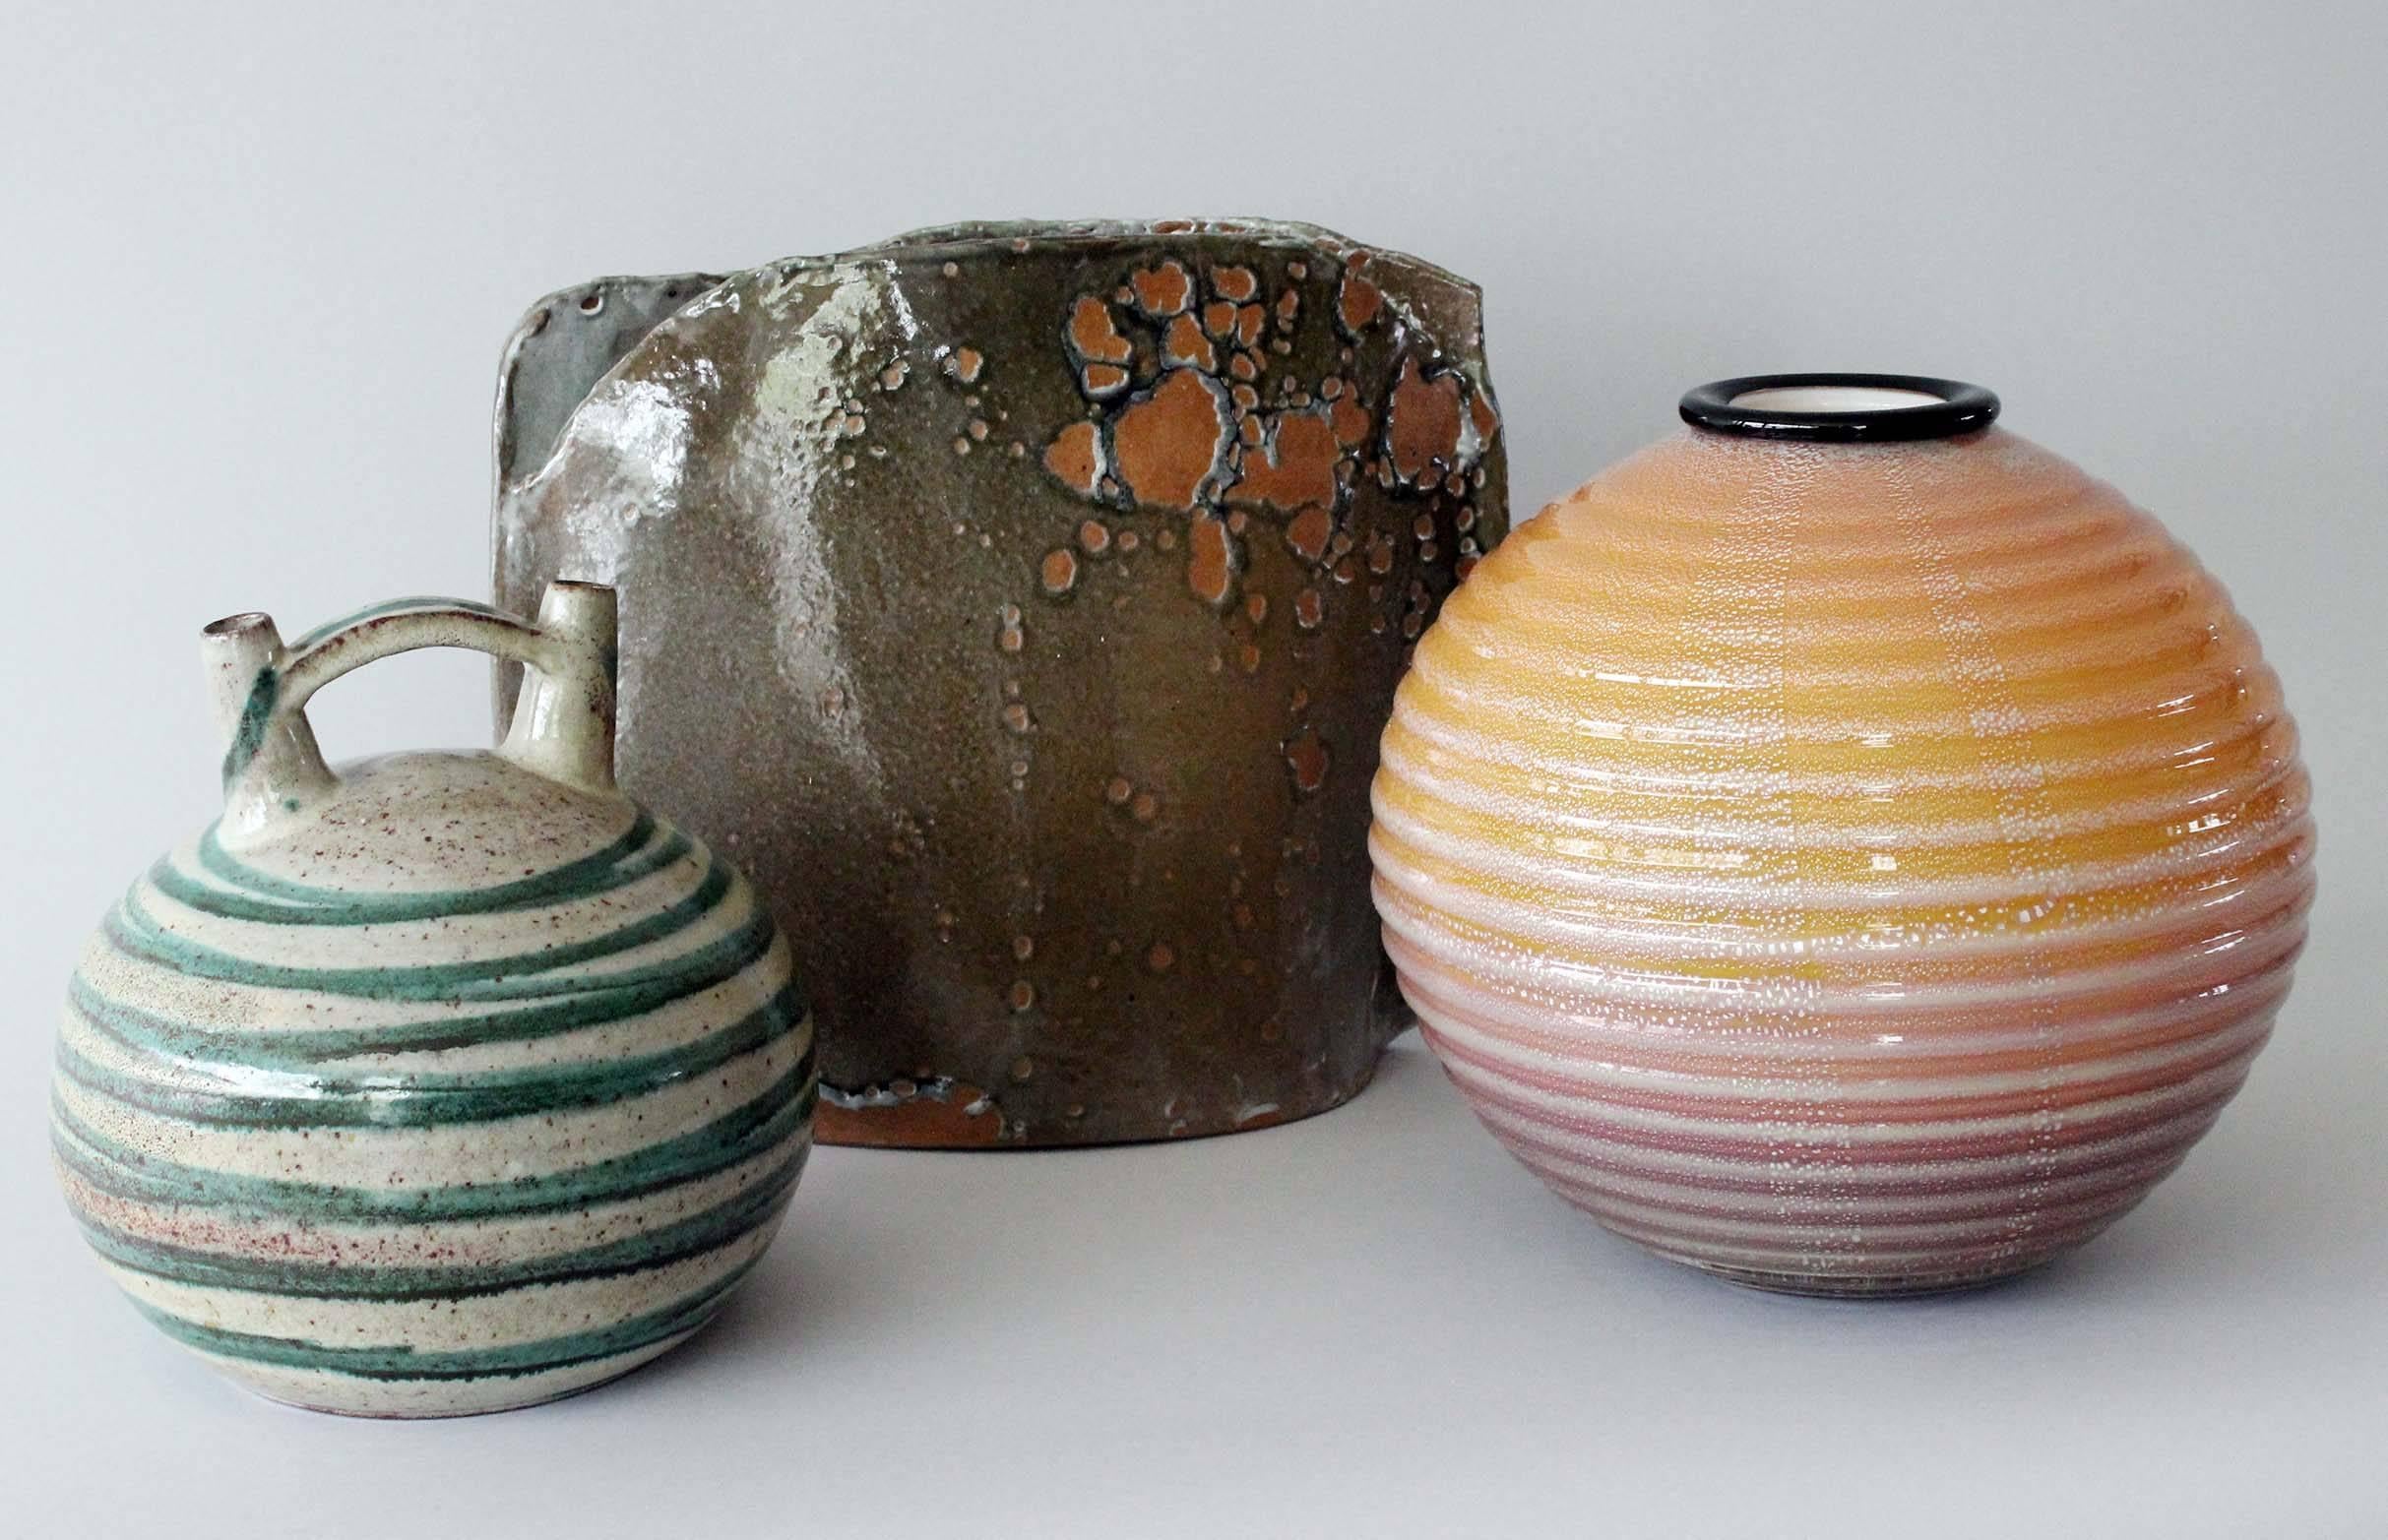 A trio of mid-century Italian ceramic vases and Seguso glass vase.
Pieces sold separately.
Prices to come -- please inquire.